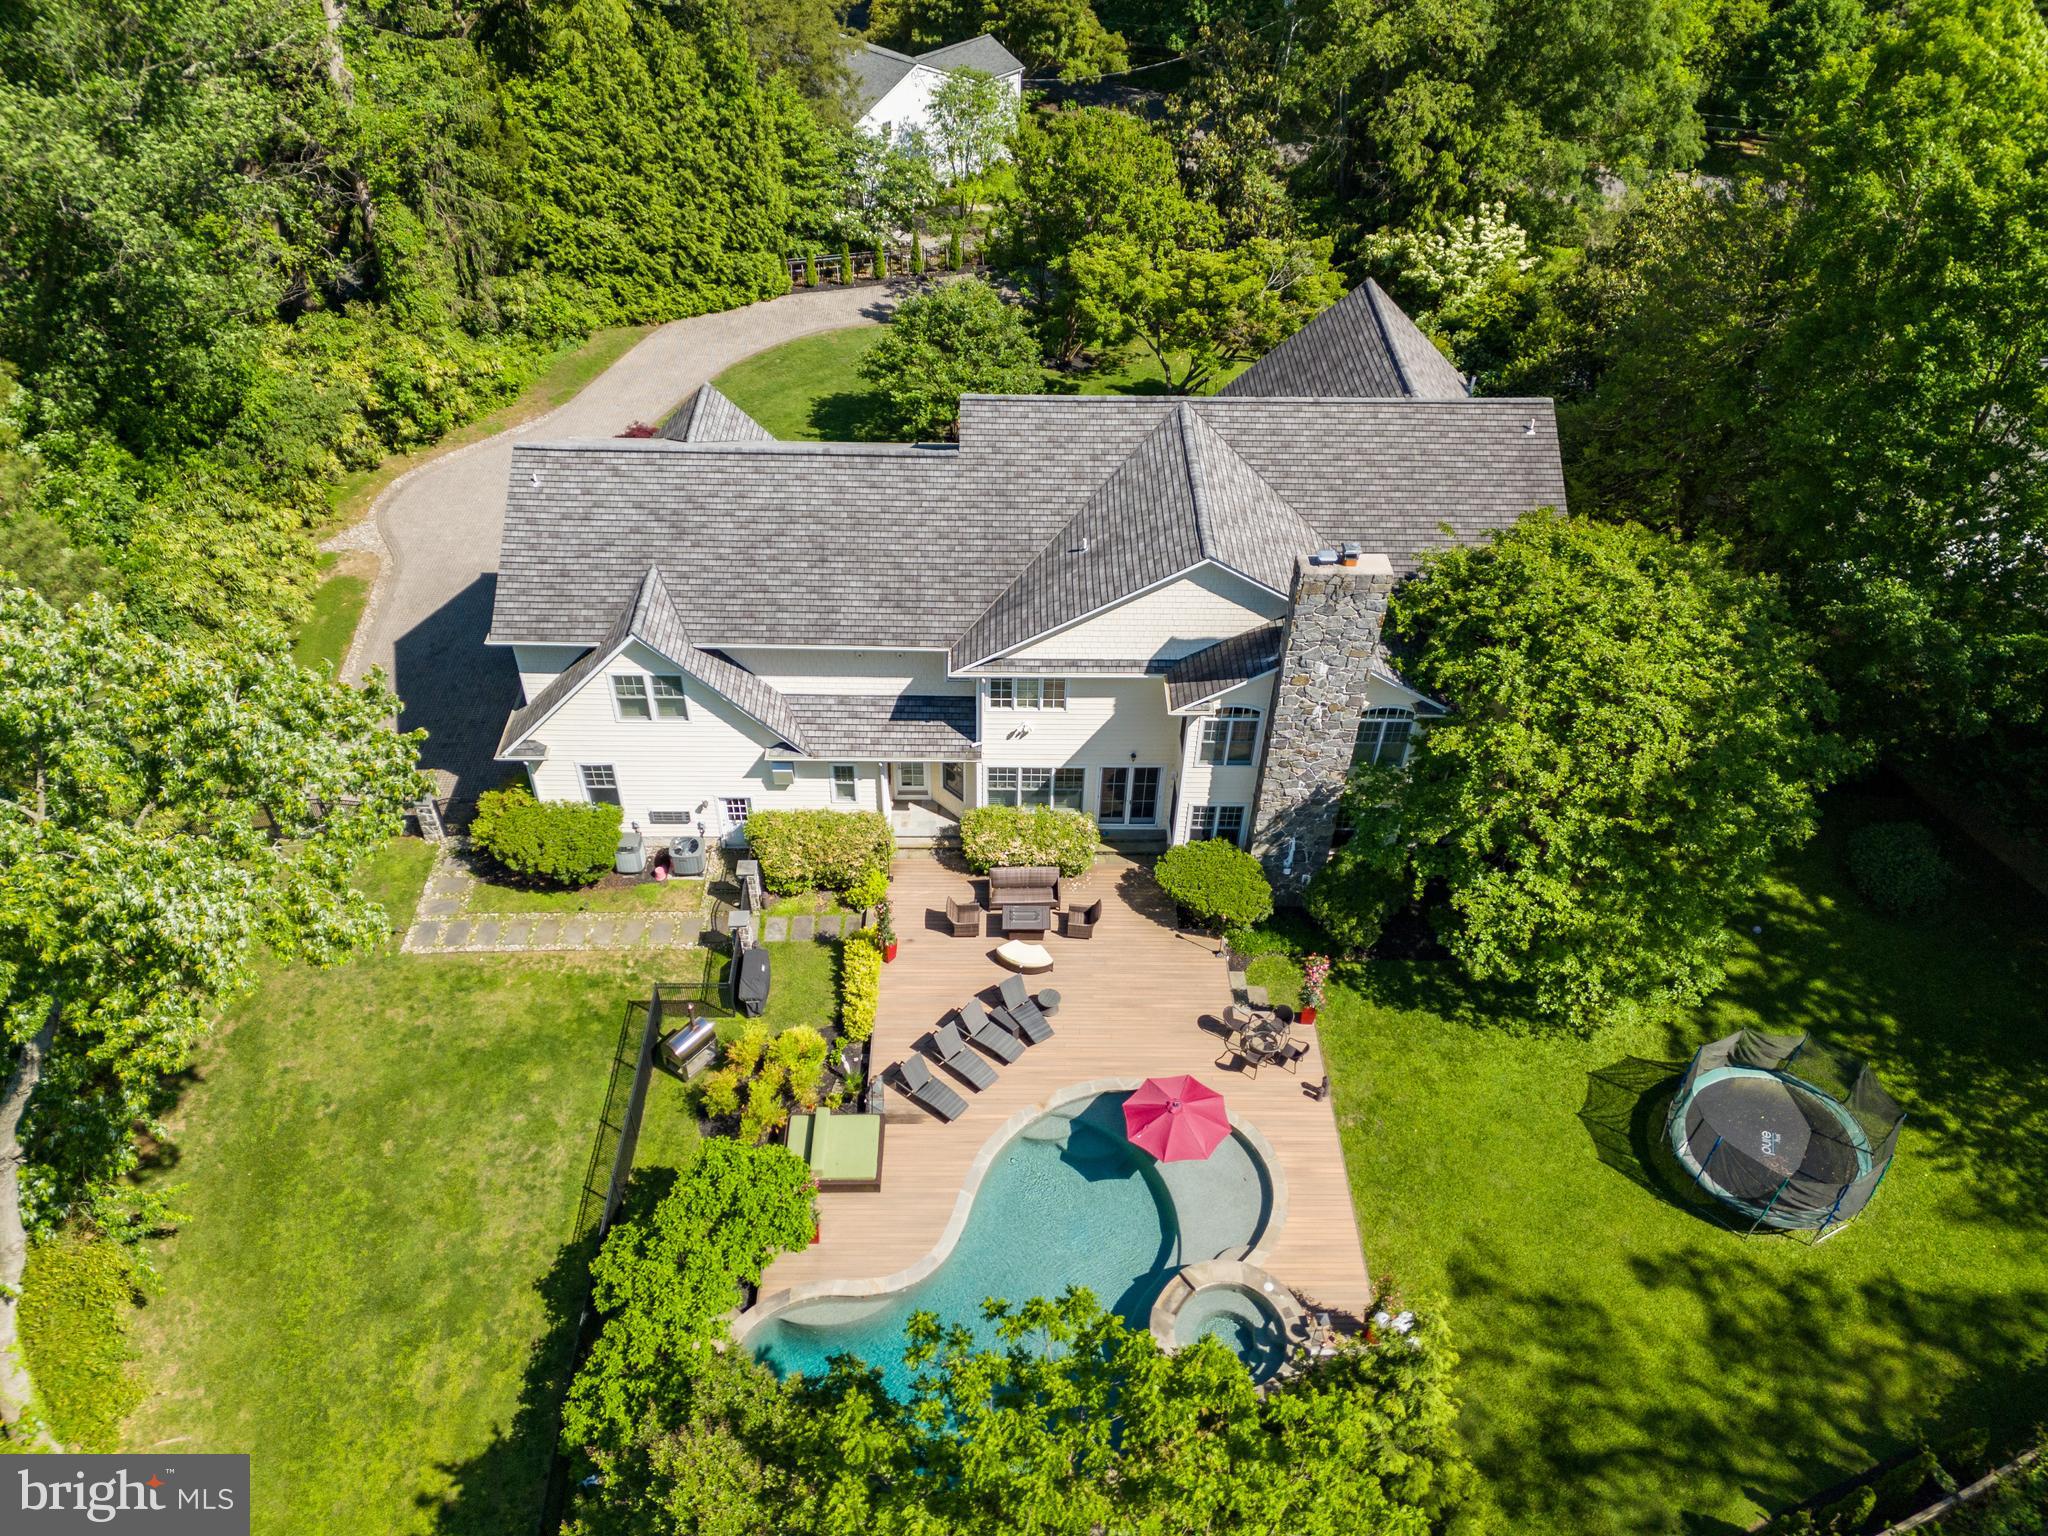 a aerial view of a house with swimming pool and garden